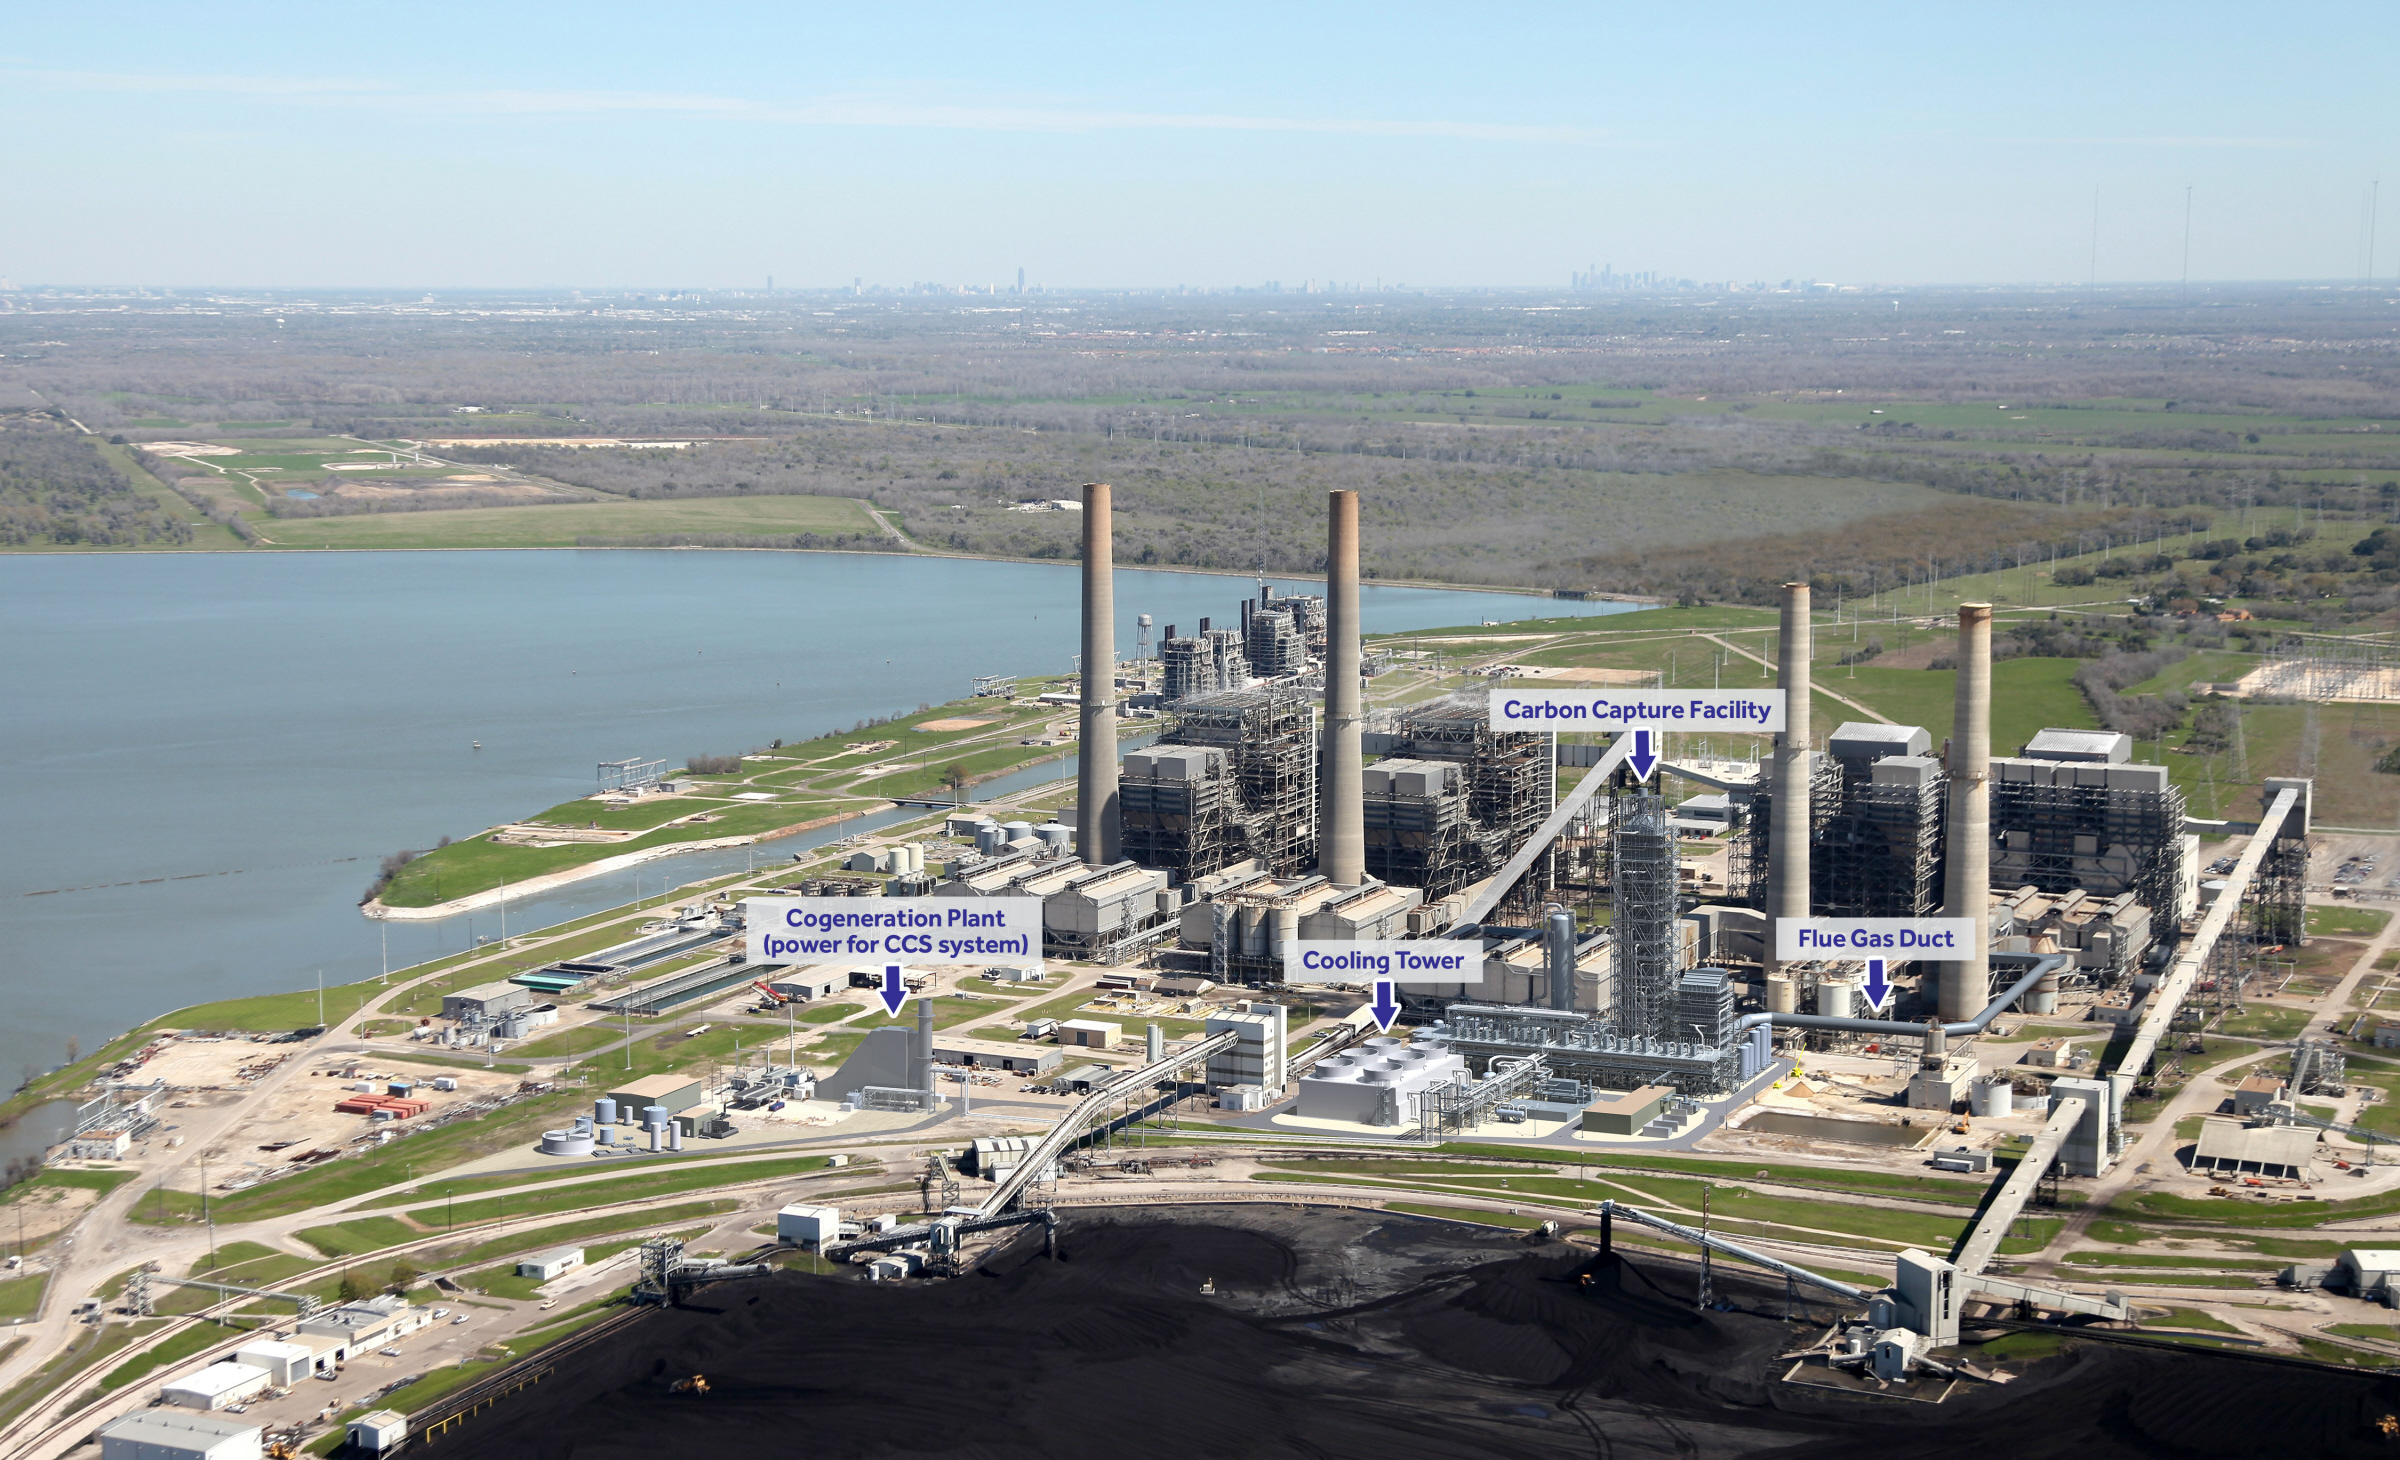 Bechtel working with Drax to build biomass plants with carbon capture & storage